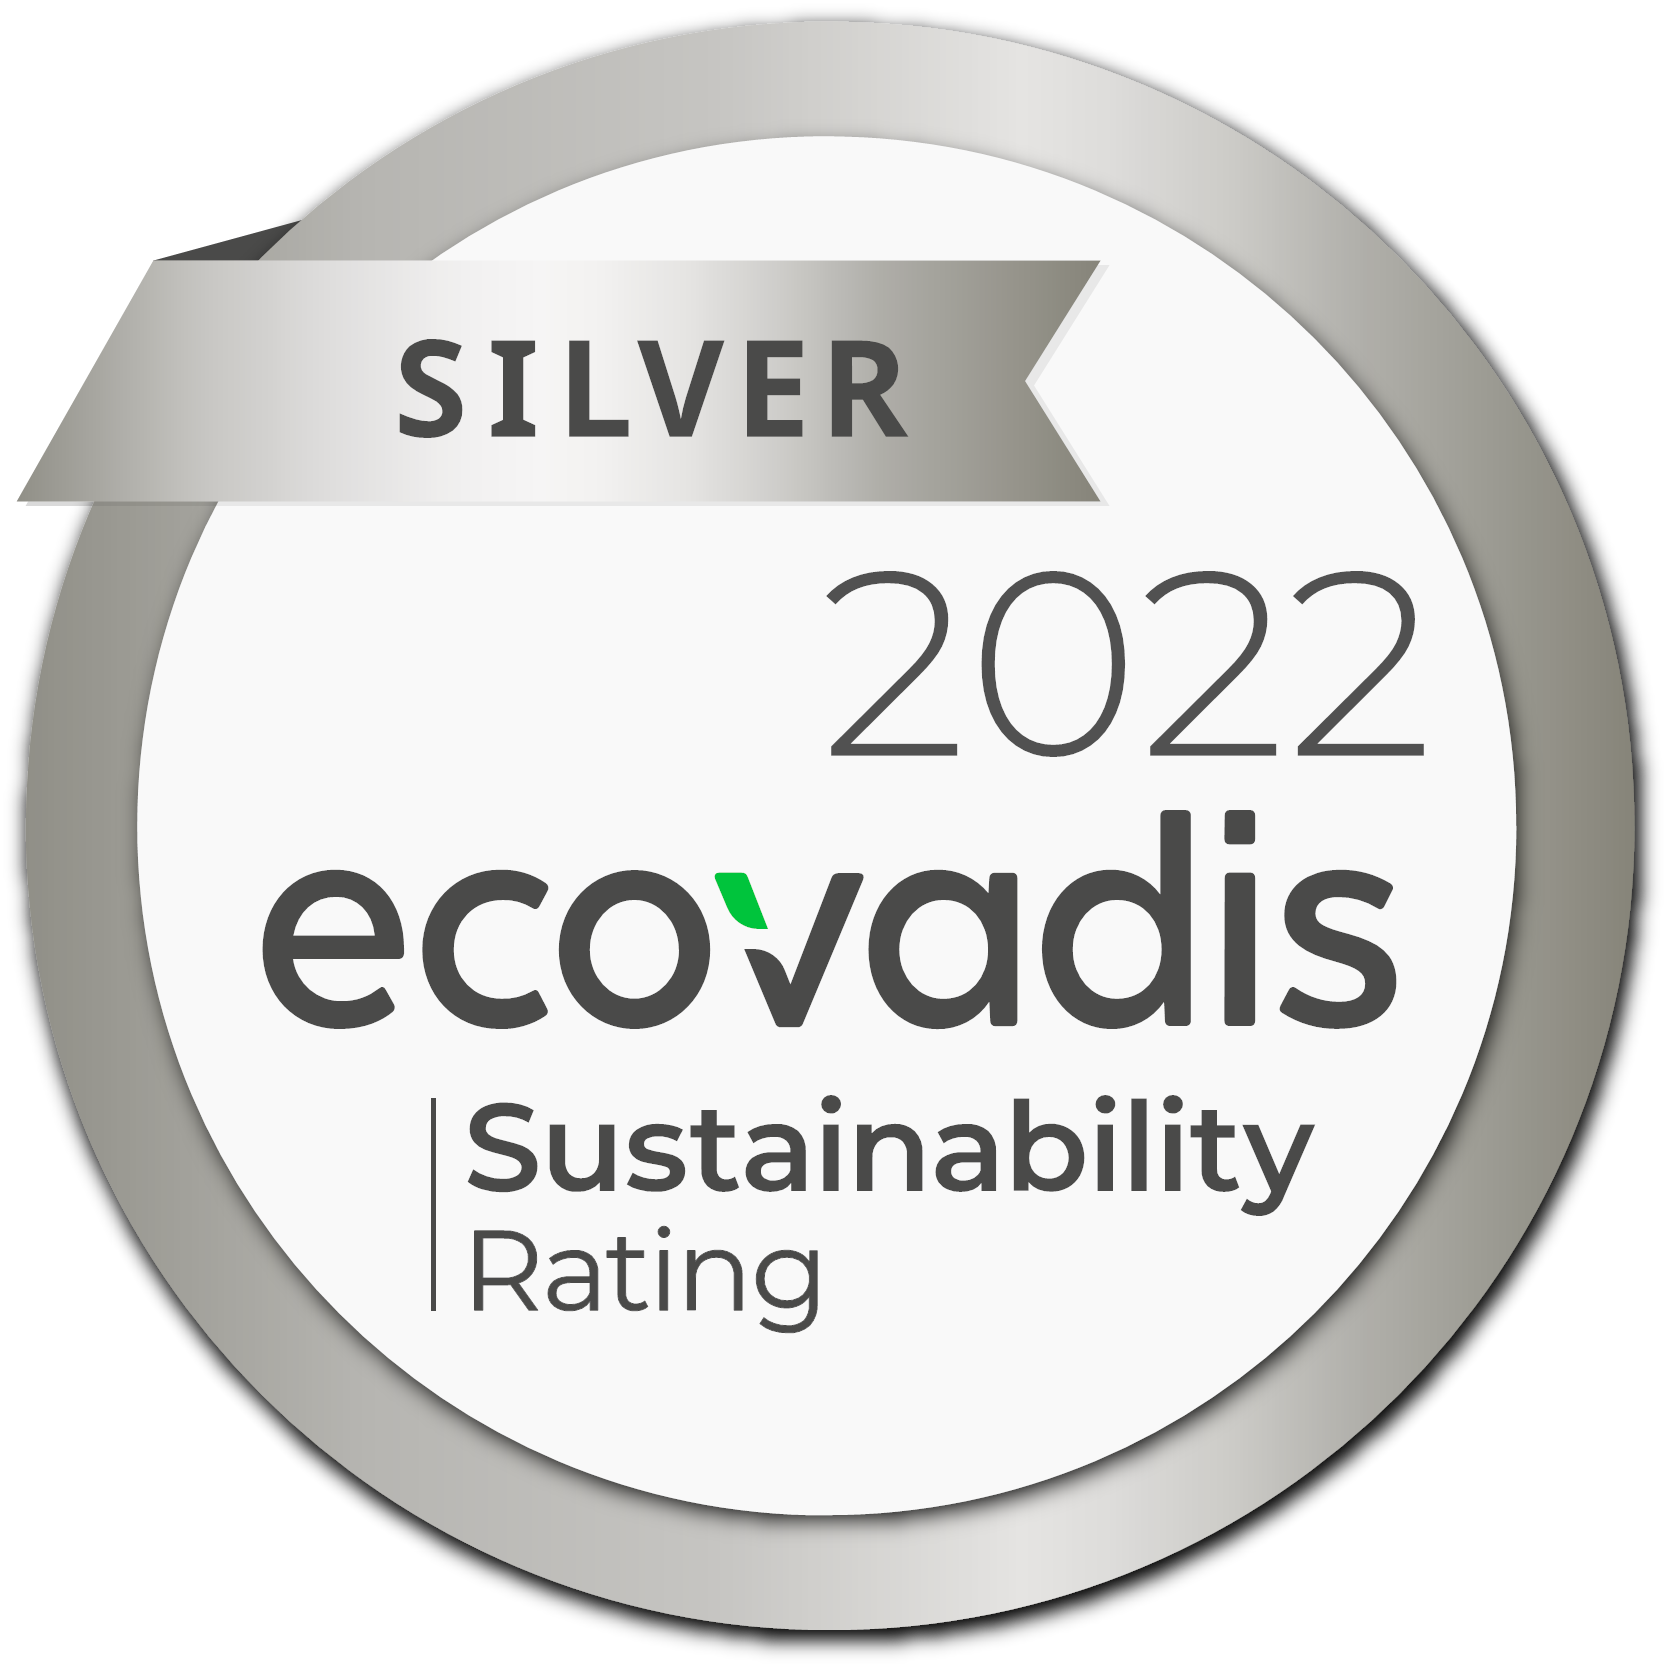 Ecovadis Sustainability Rating - Silver